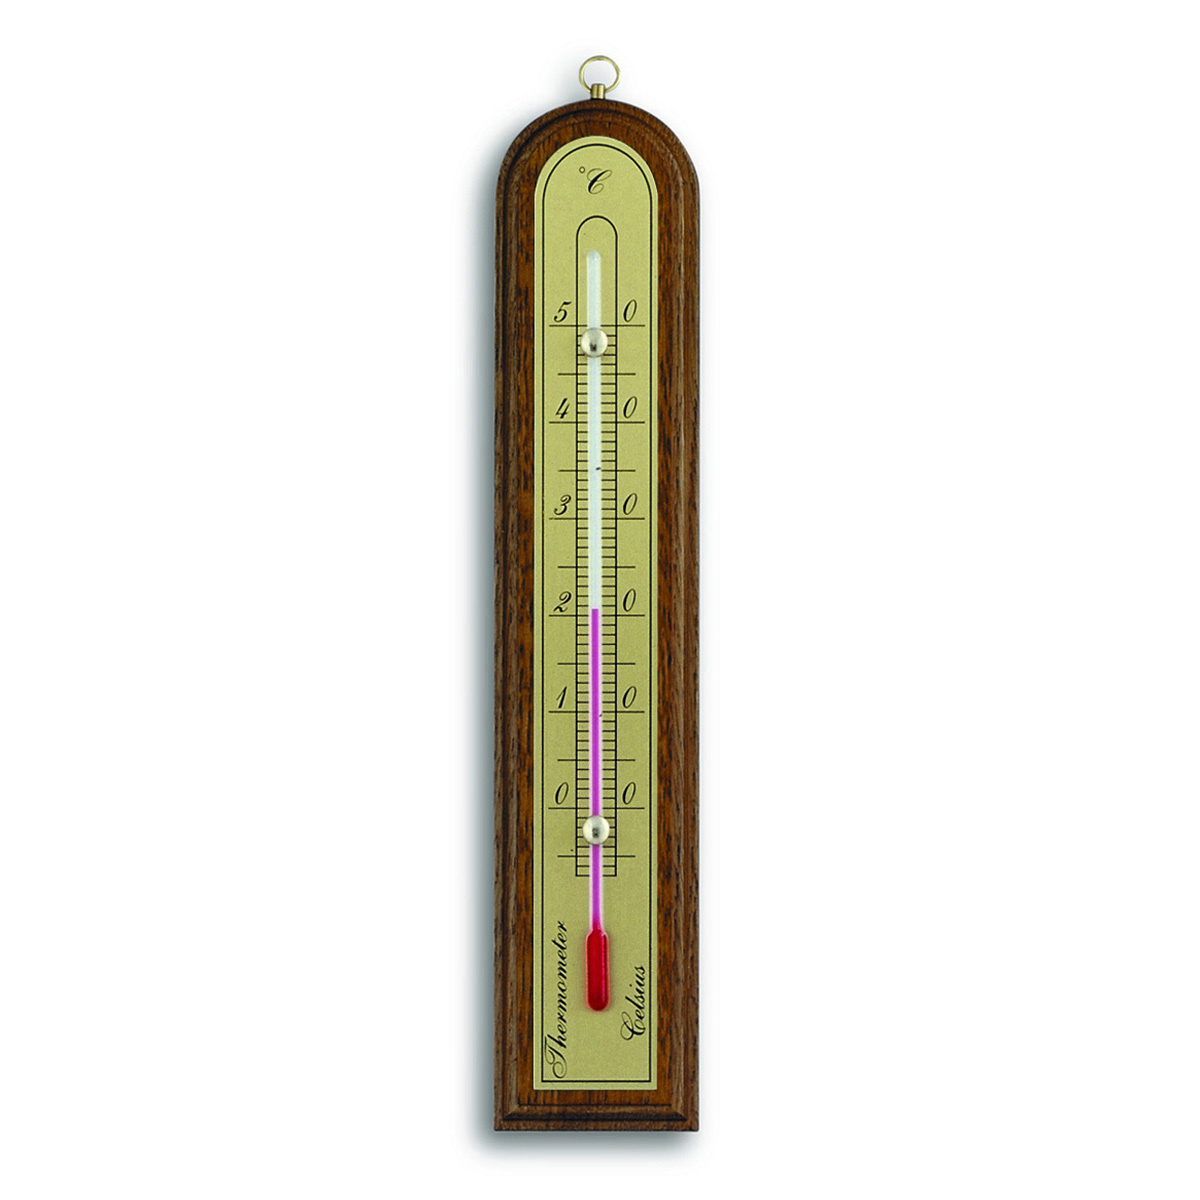 Analogue indoor thermometer made of oak